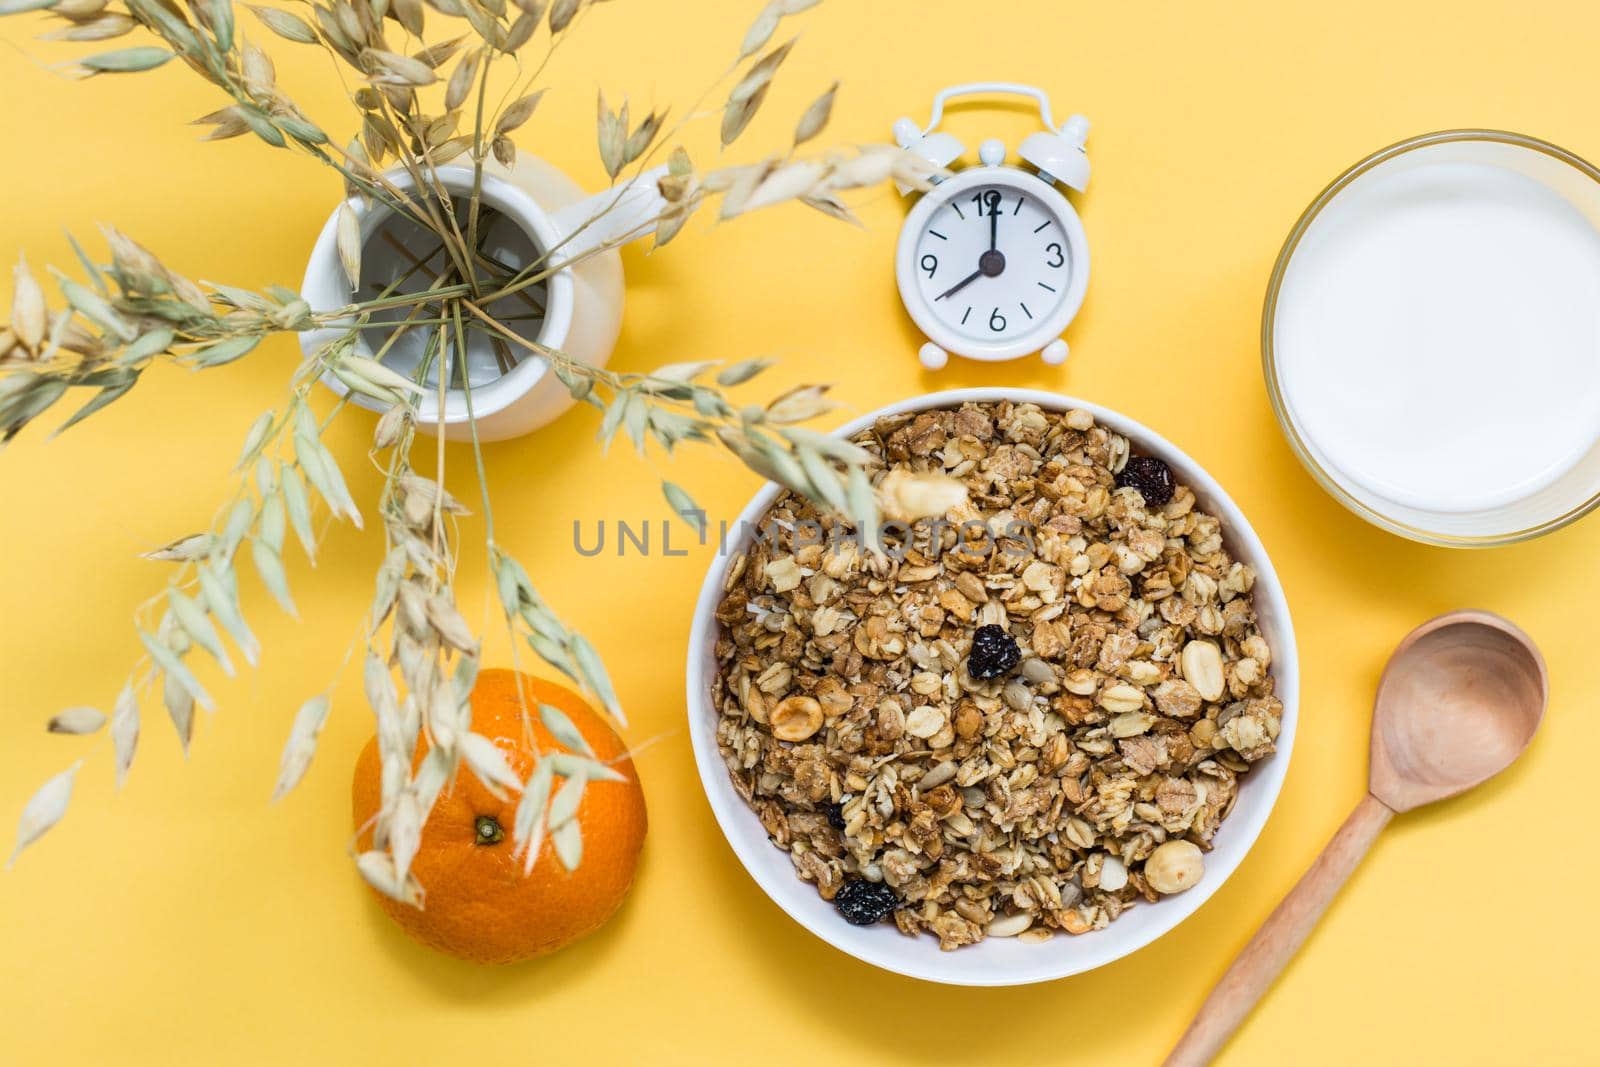 Healthy hearty breakfast. Baked granola of oats, nuts and raisins in a bowl, a glass of milk, an orange and an alarm clock on a yellow background. Top view by Aleruana